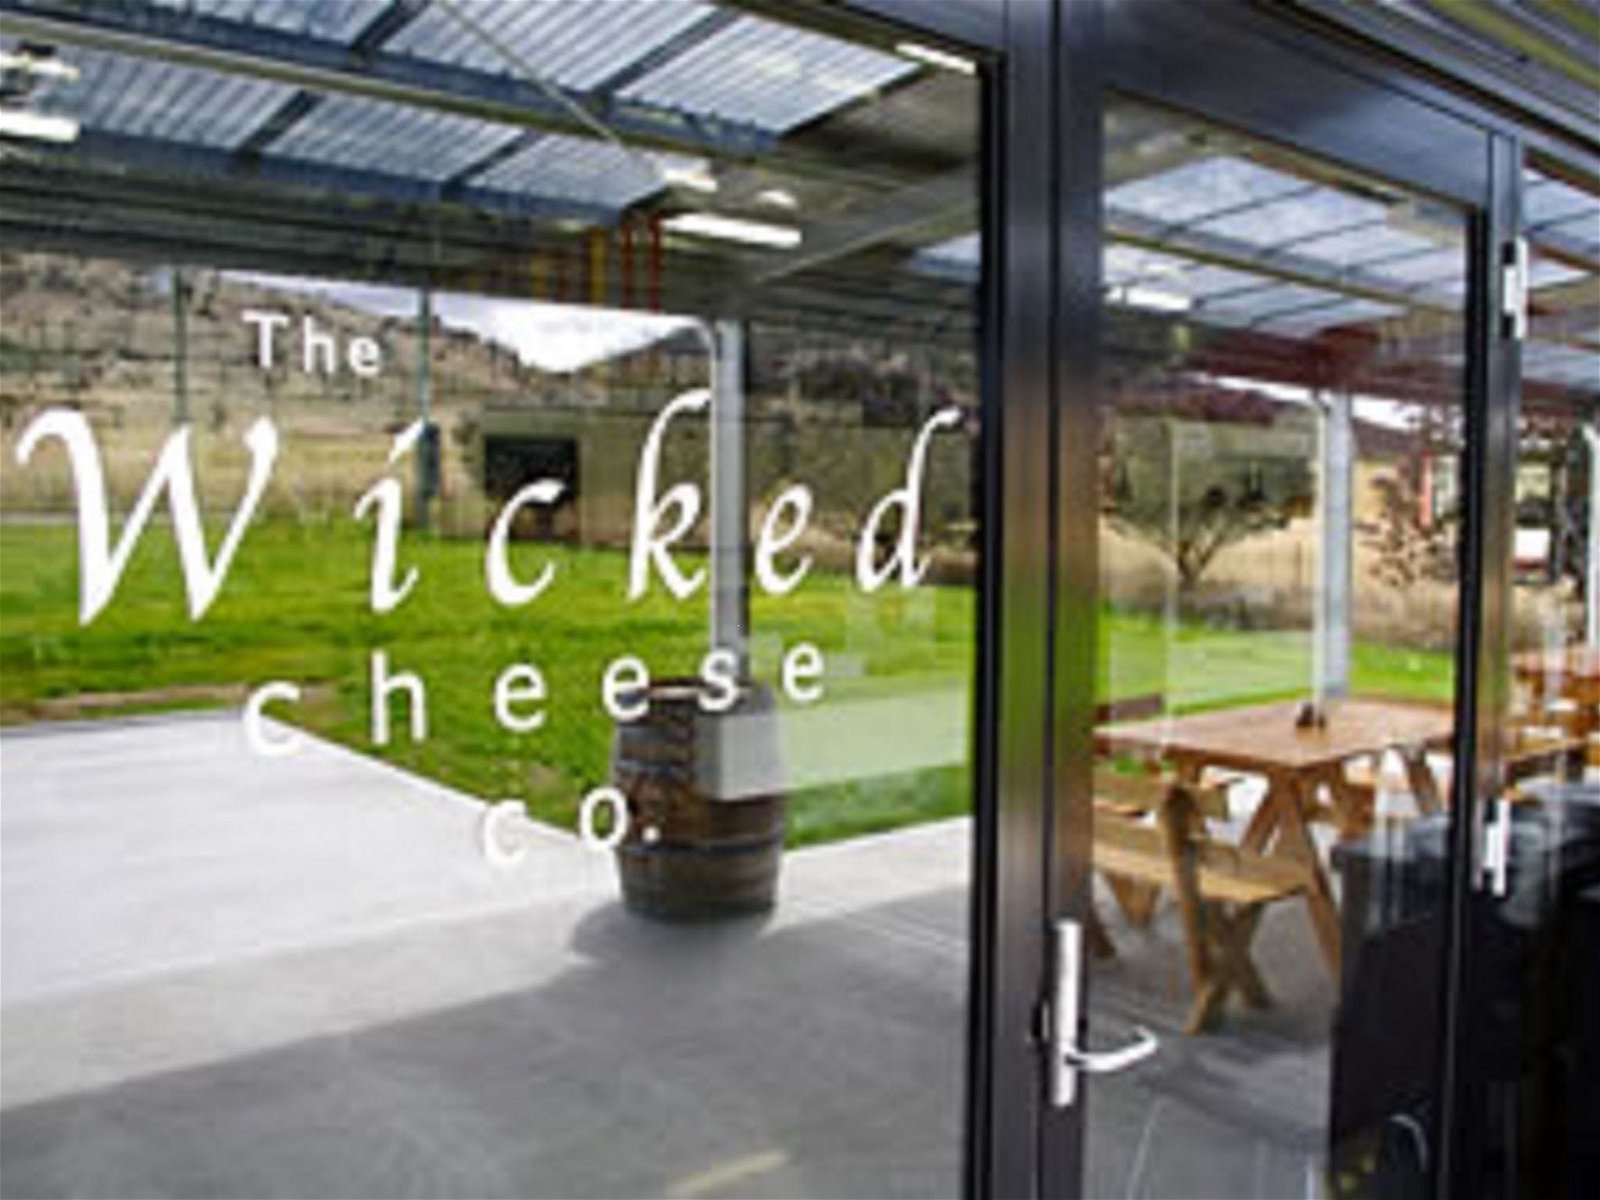 The Wicked Cheese Company